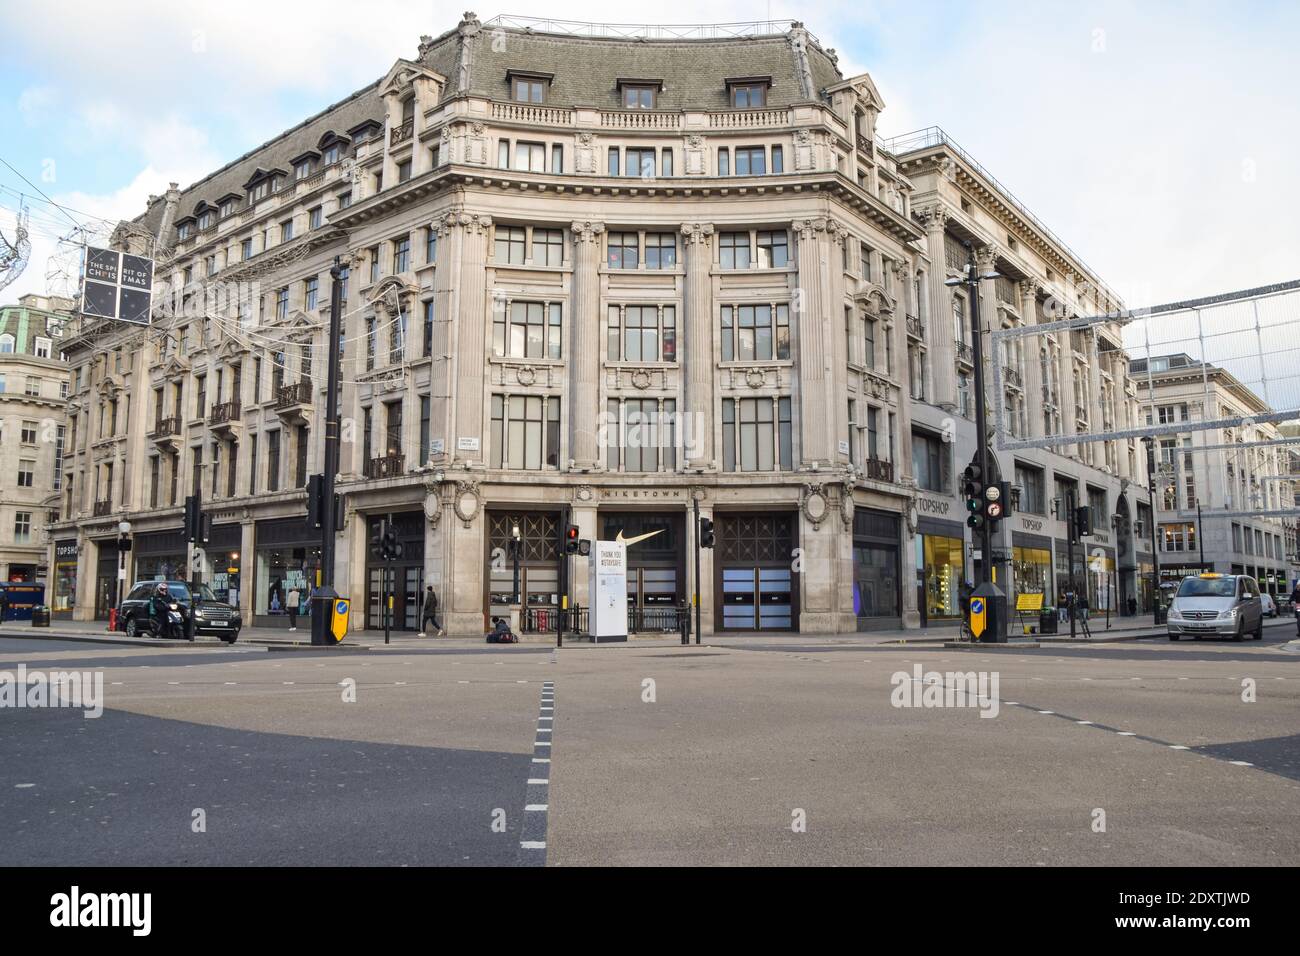 A view of a deserted Oxford Circus, as shops and businesses close once again. London has been placed under Tier 4 restrictions as cases surge and new strains of COVID-19 emerge in England. Stock Photo